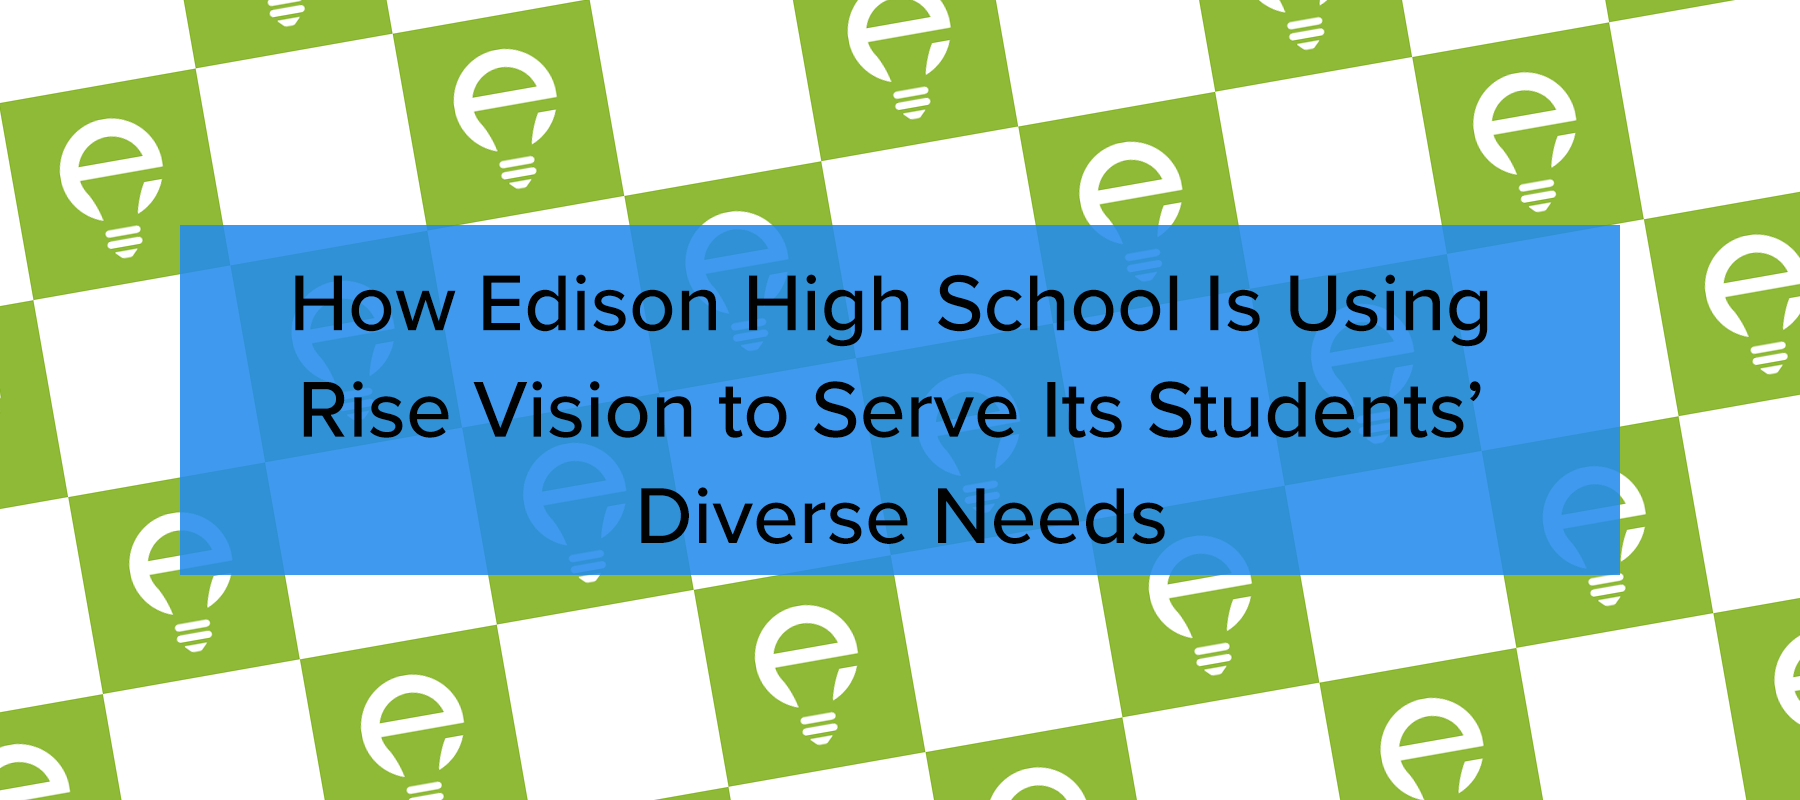 How Edison High School Is Using Rise Vision to Serve Its Students Diverse Needs